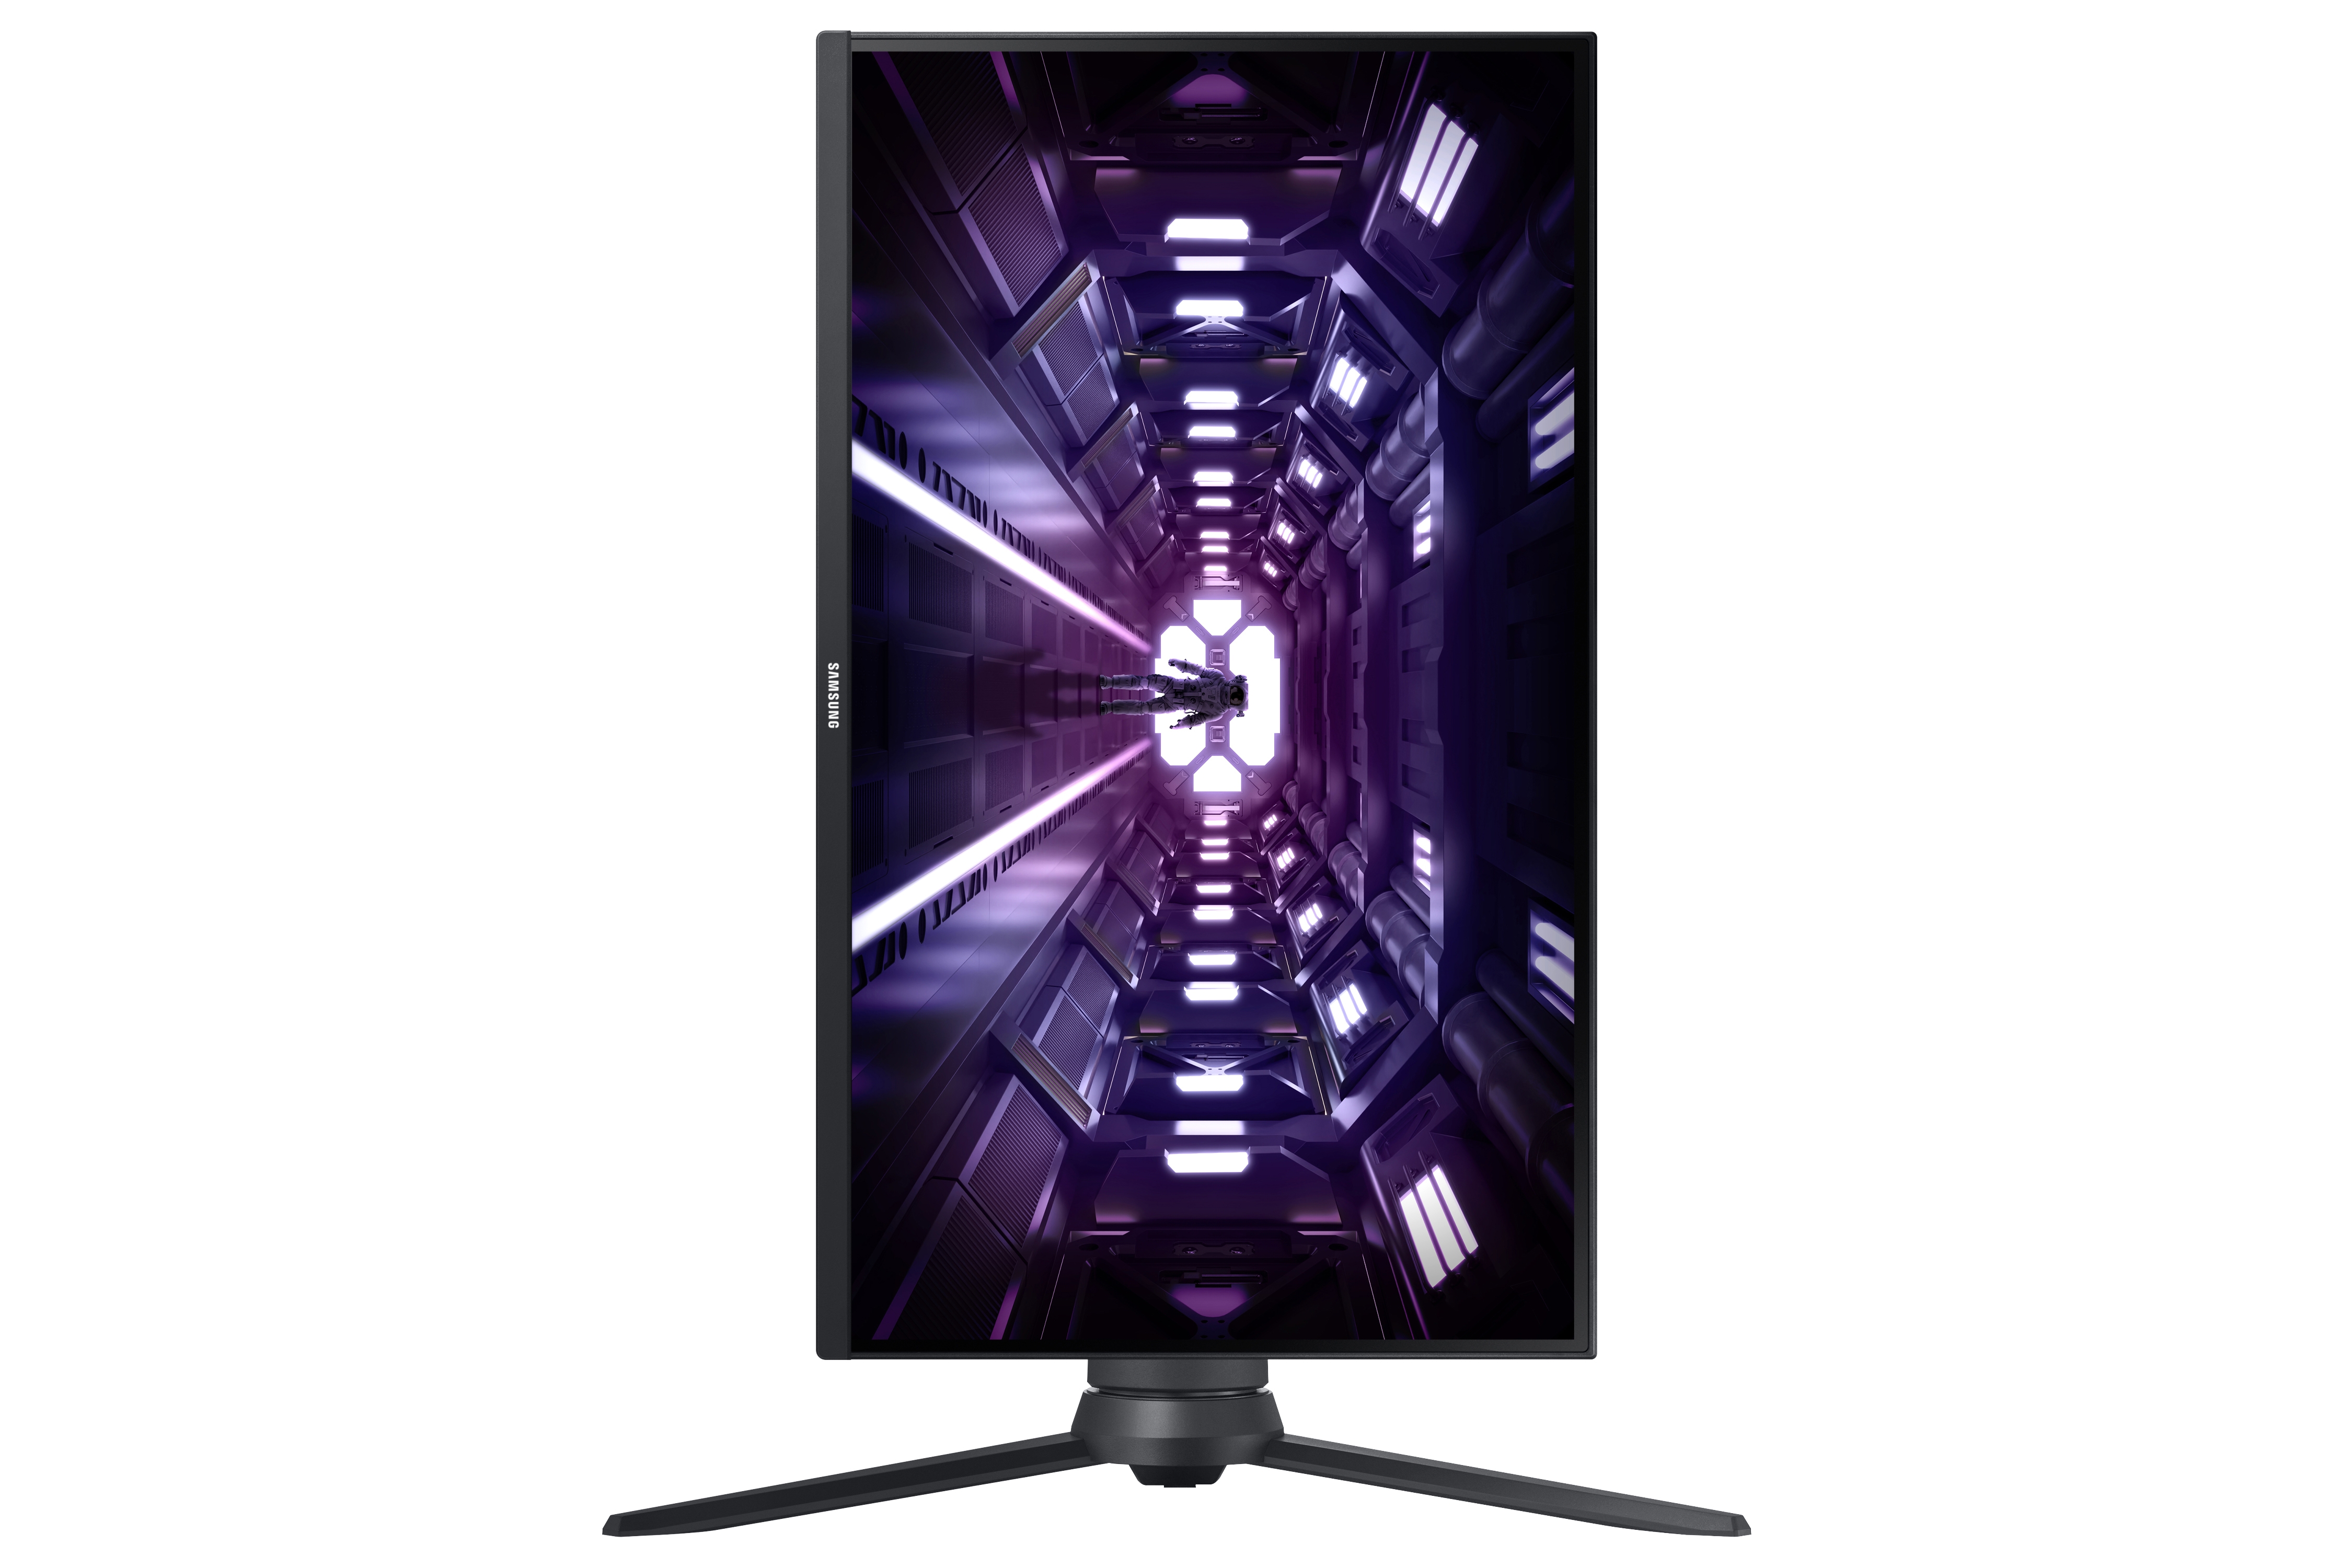  SAMSUNG Odyssey G3 Series 27-inch FHD 1080p Gaming Monitor,  144Hz, 1ms, Height Adjustable Stand, 3-Sided Border-Less, FreeSync Premium,  with MTC HDMI